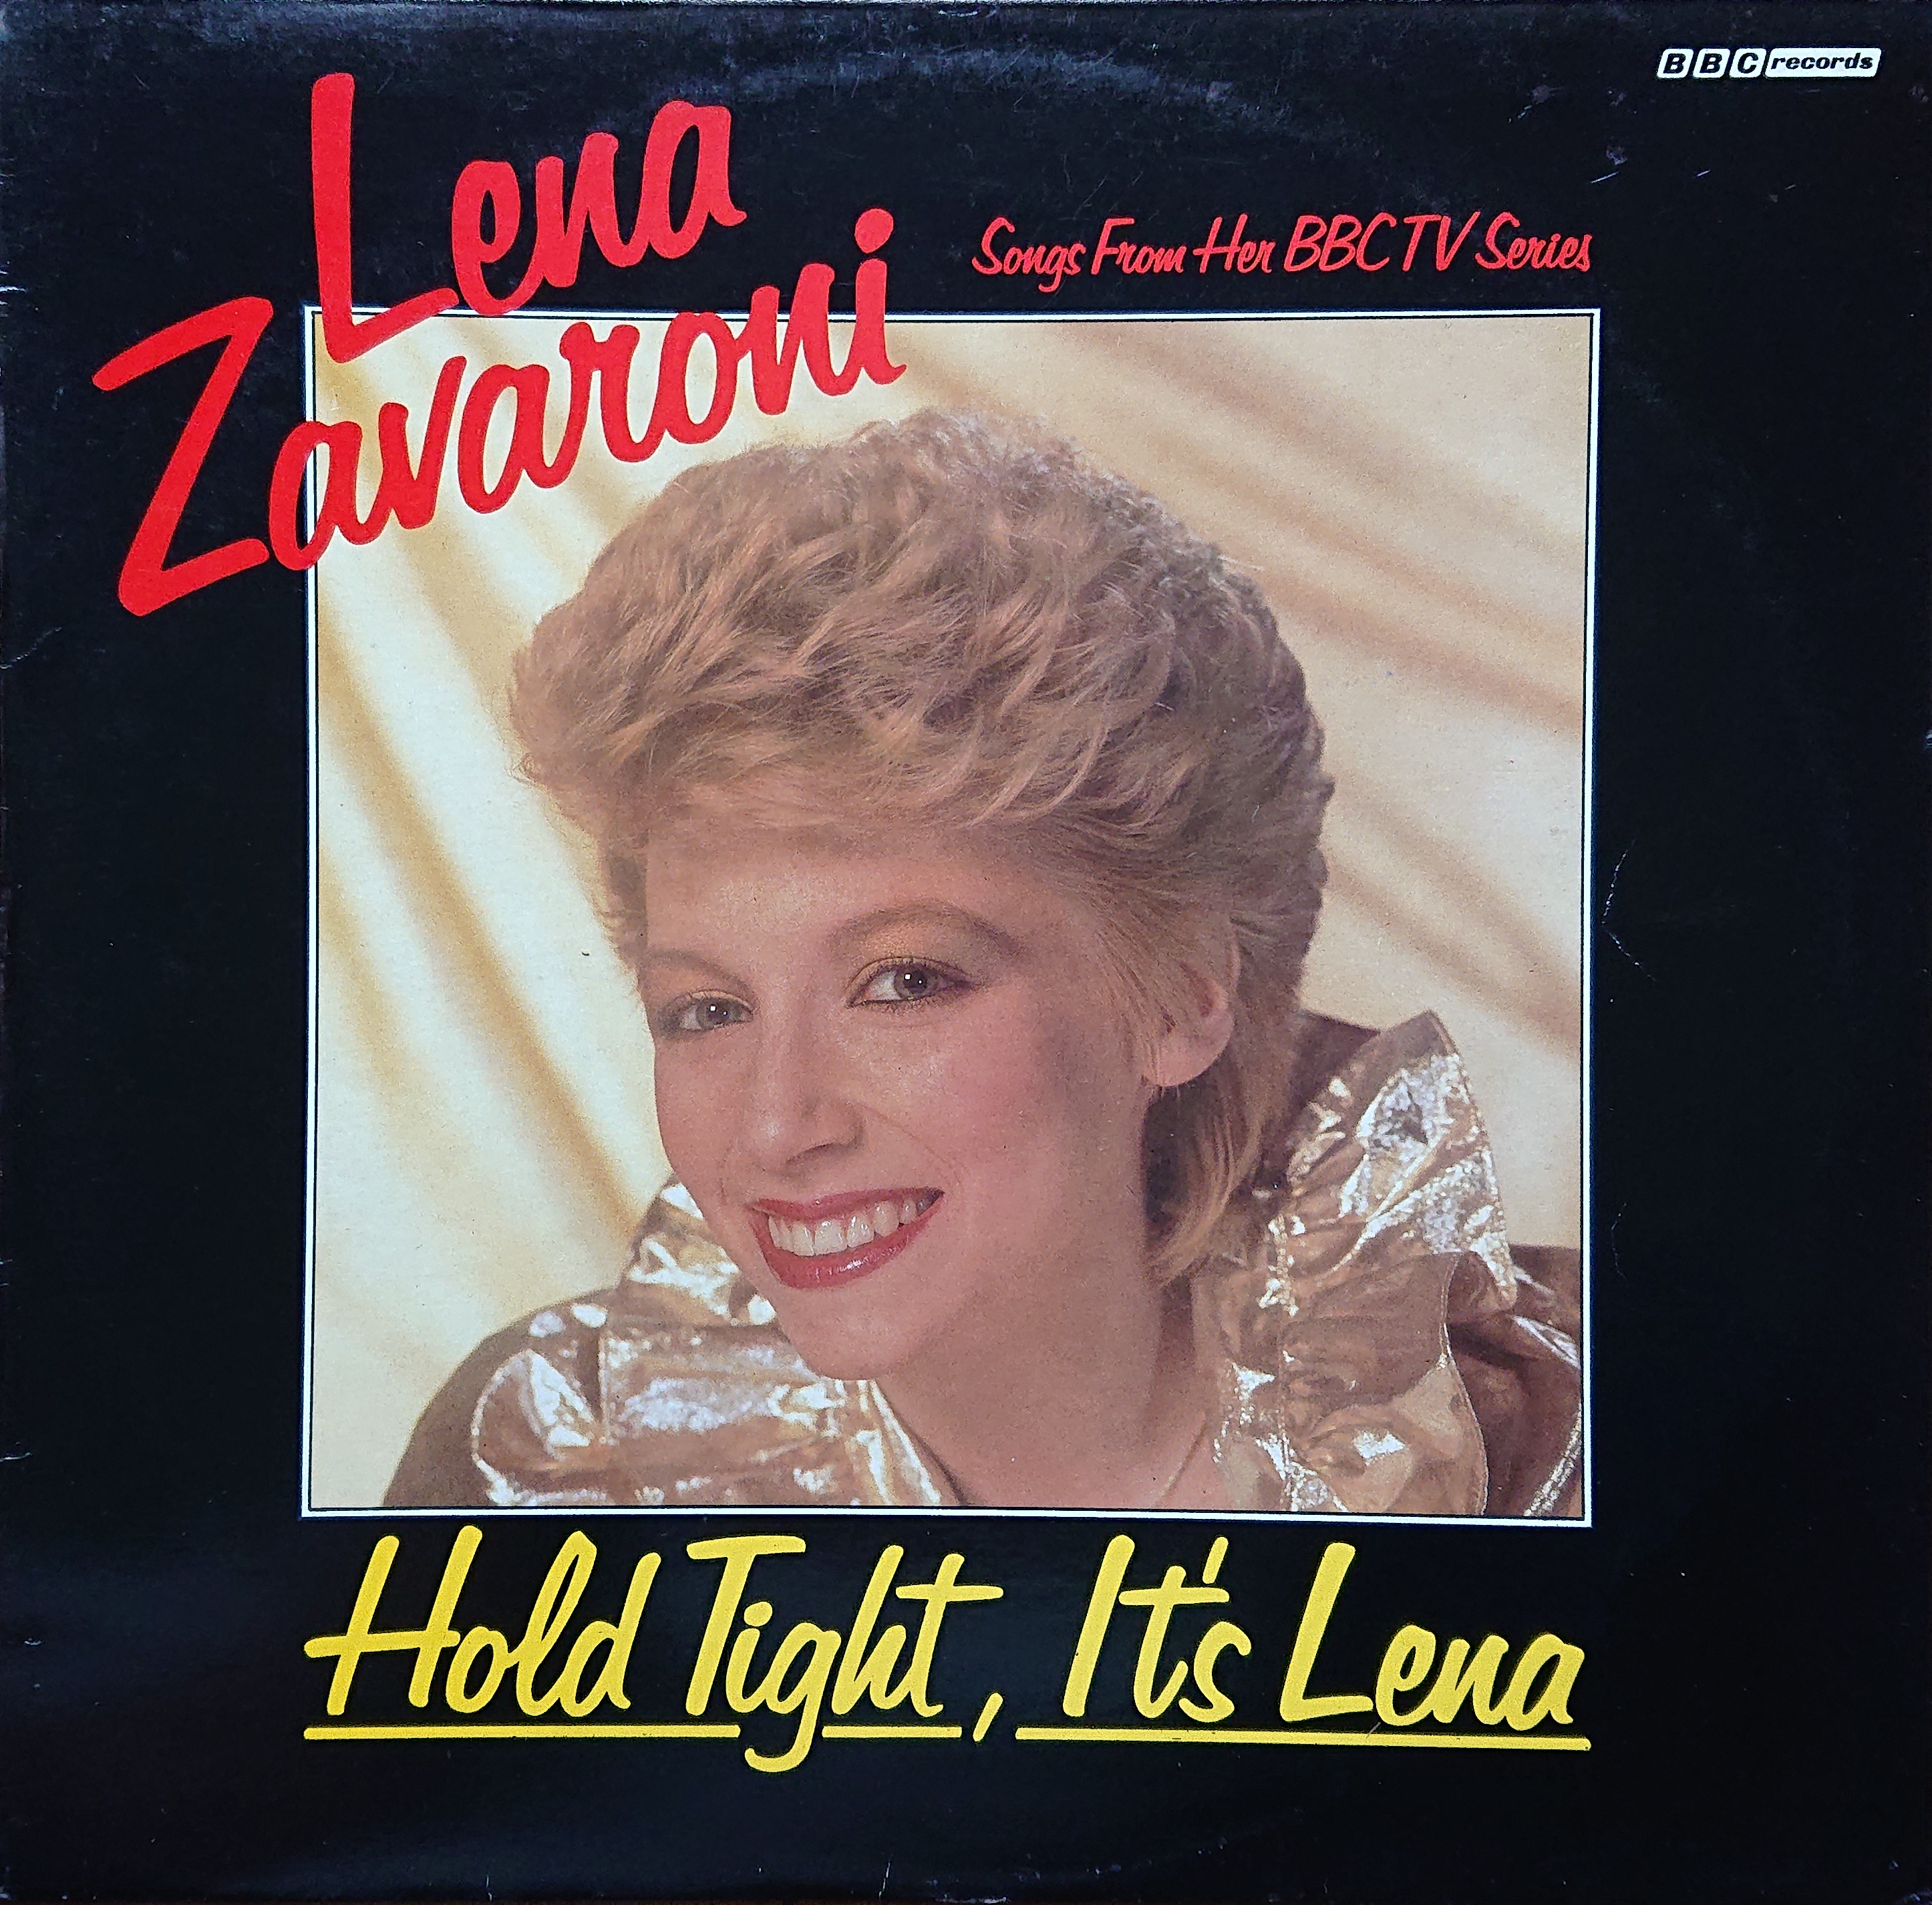 Picture of REB 443 Hold tight - Lena Zavaroni by artist Lena Zavaroni from the BBC records and Tapes library